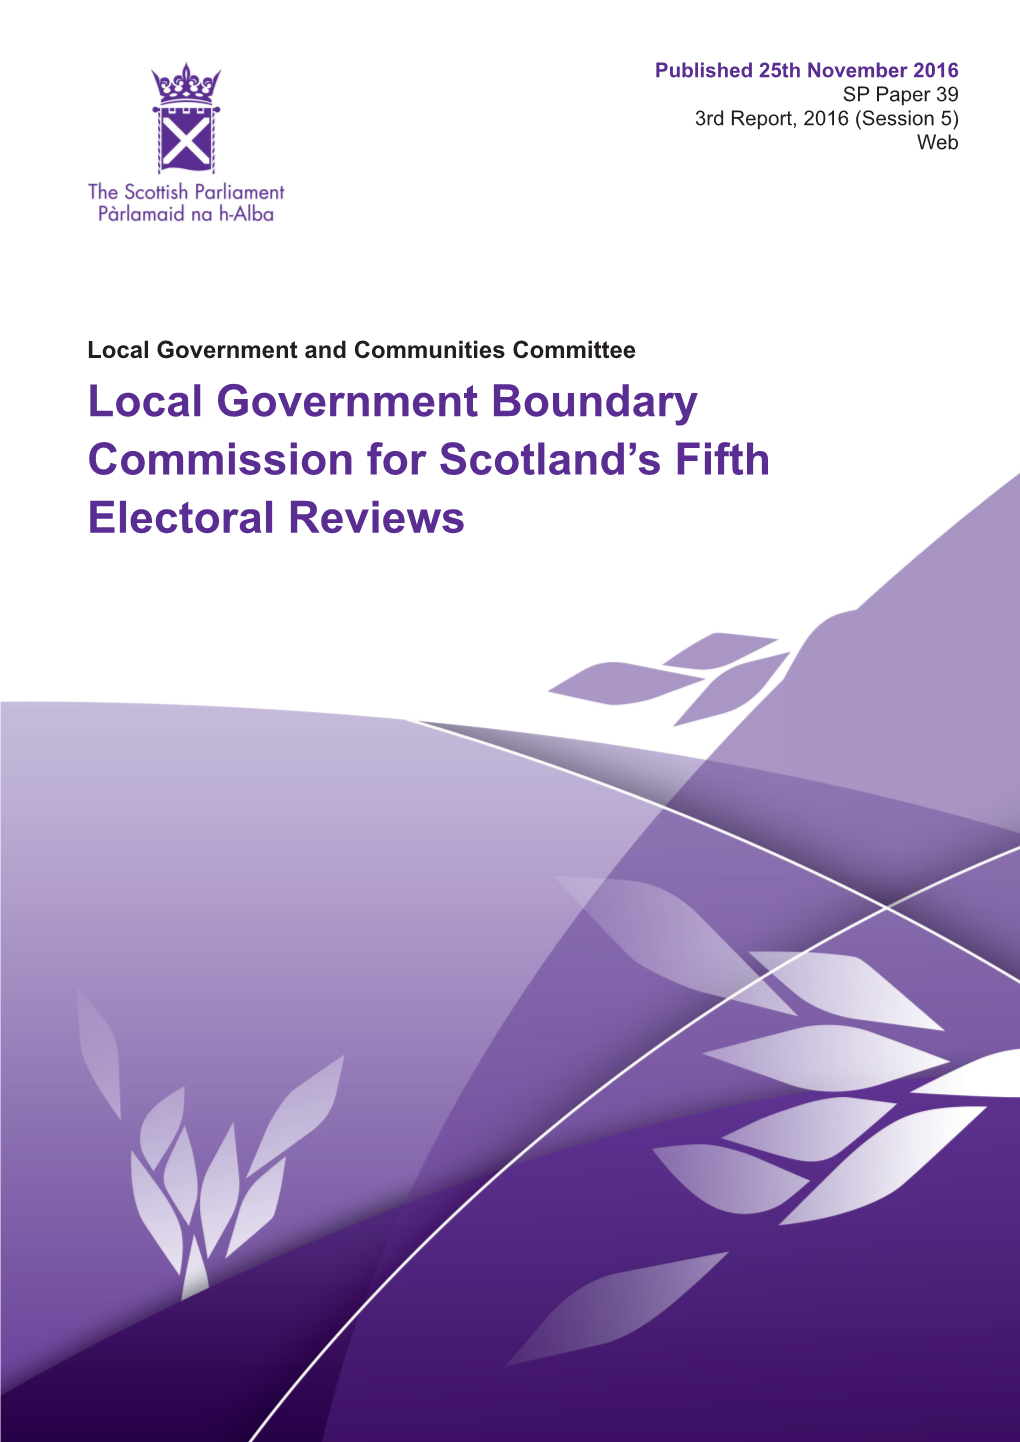 Local Government Boundary Commission for Scotland's Fifth Electoral Reviews, 3Rd Report, 2016 (Session 5)